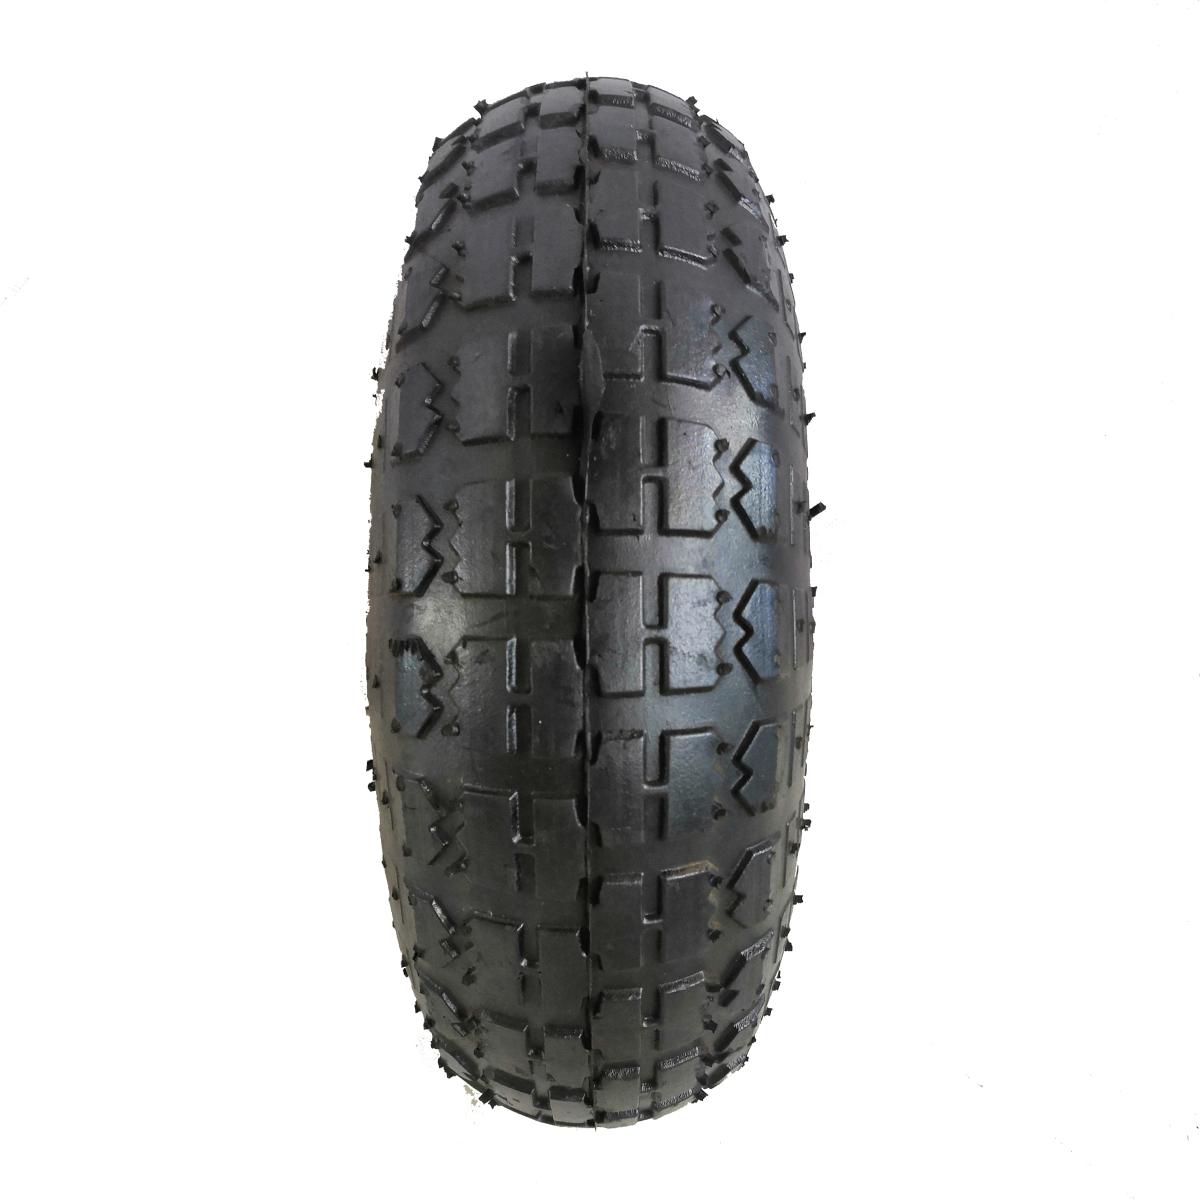 tires and inner tubes are made of heavy-duty rubber, and the hub are made of high-quality plastic. Air wheels